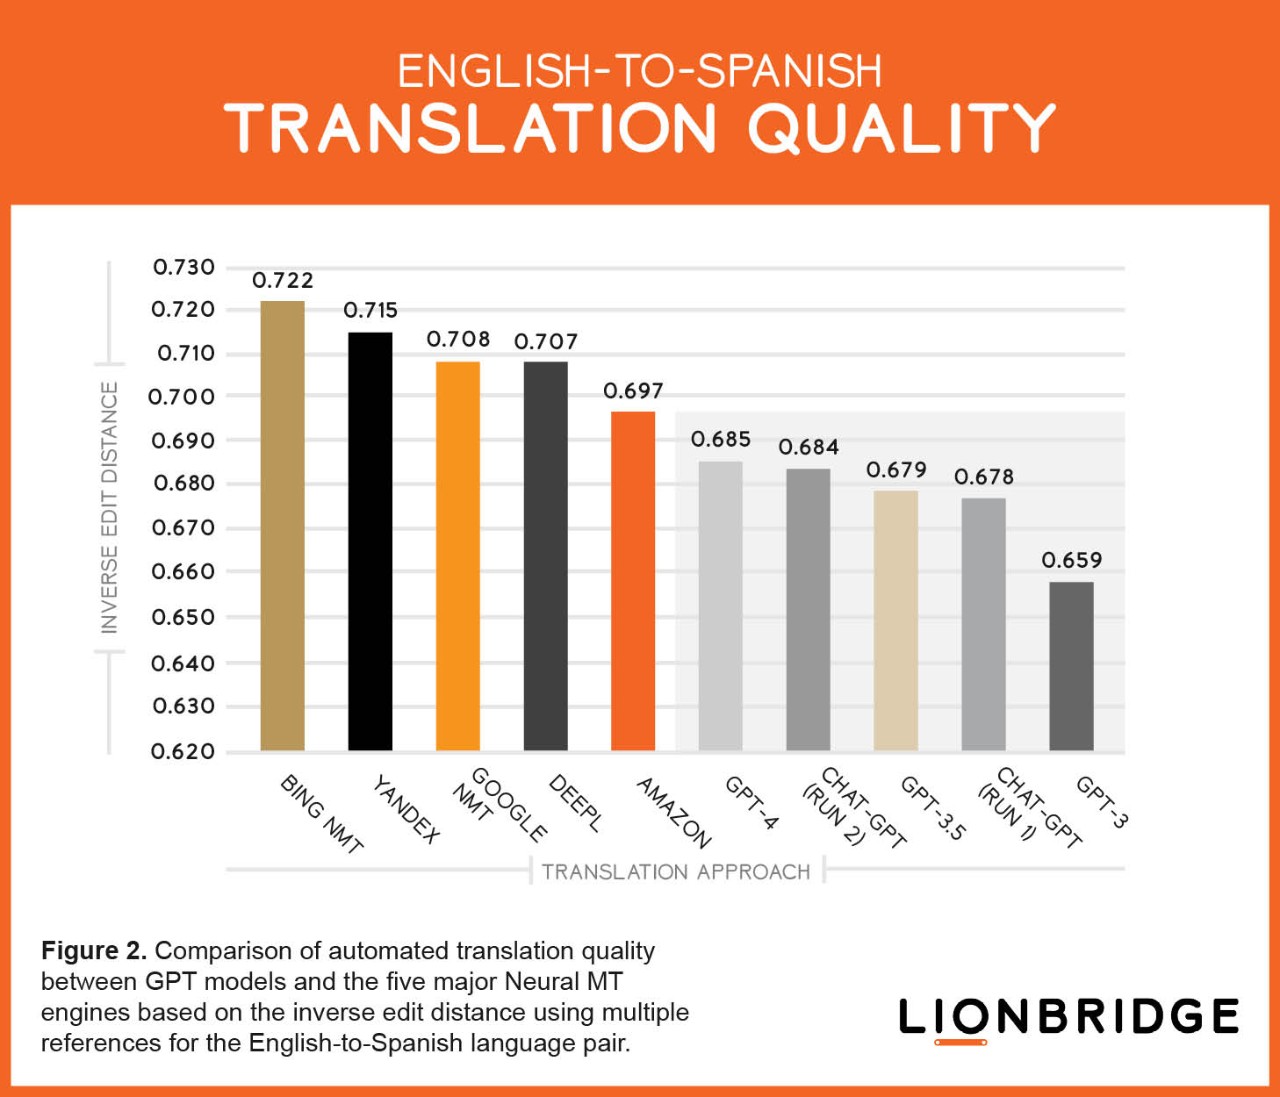 Comparison of automated Translation quality between GPT models and major Neural MT engines for the English-to-Spanish language pair